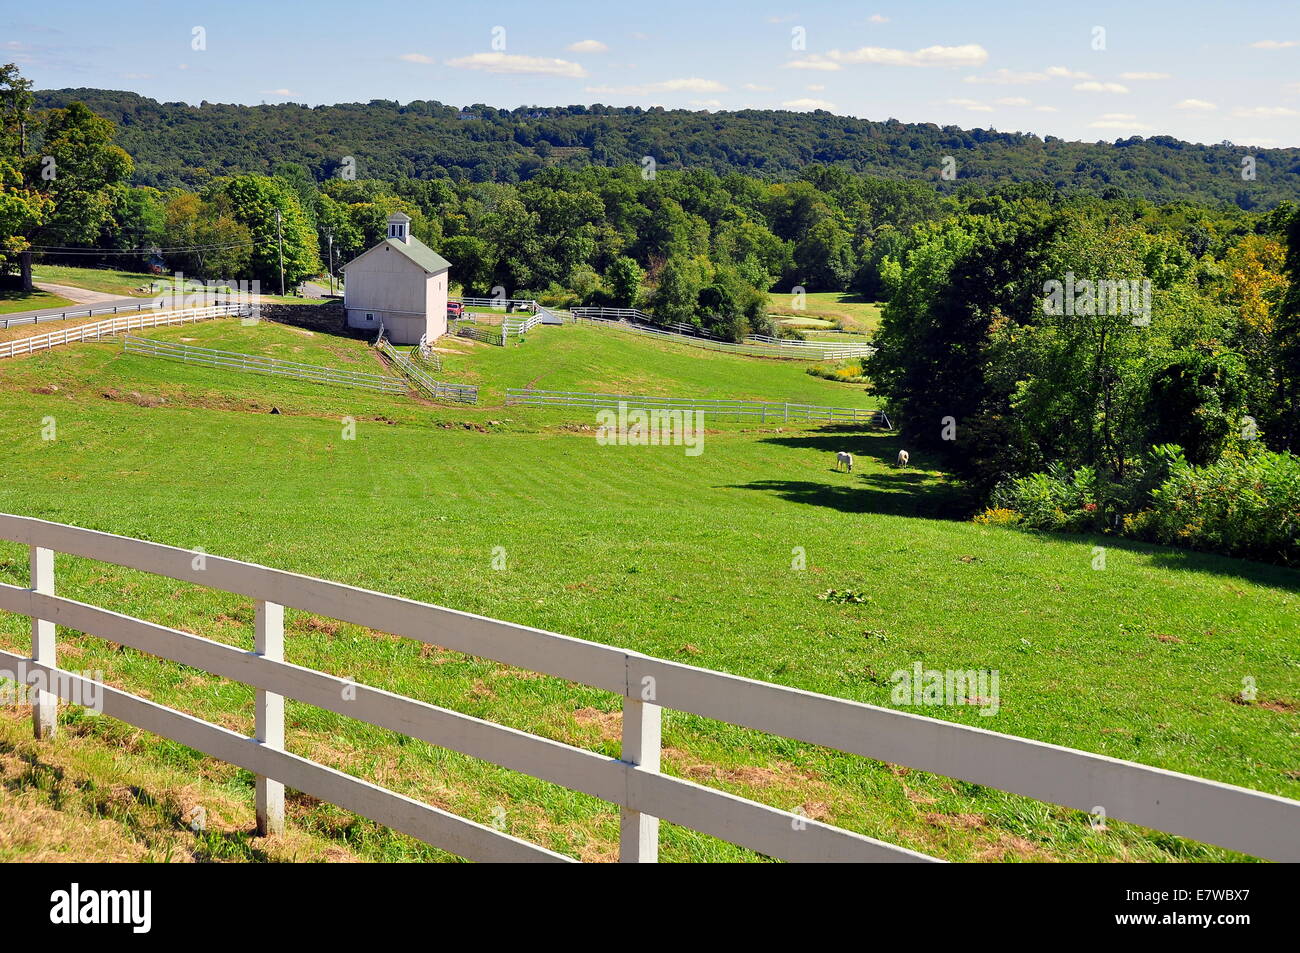 New Preston, Connecticut: View over rolling farmlands with white wooden fences   * Stock Photo